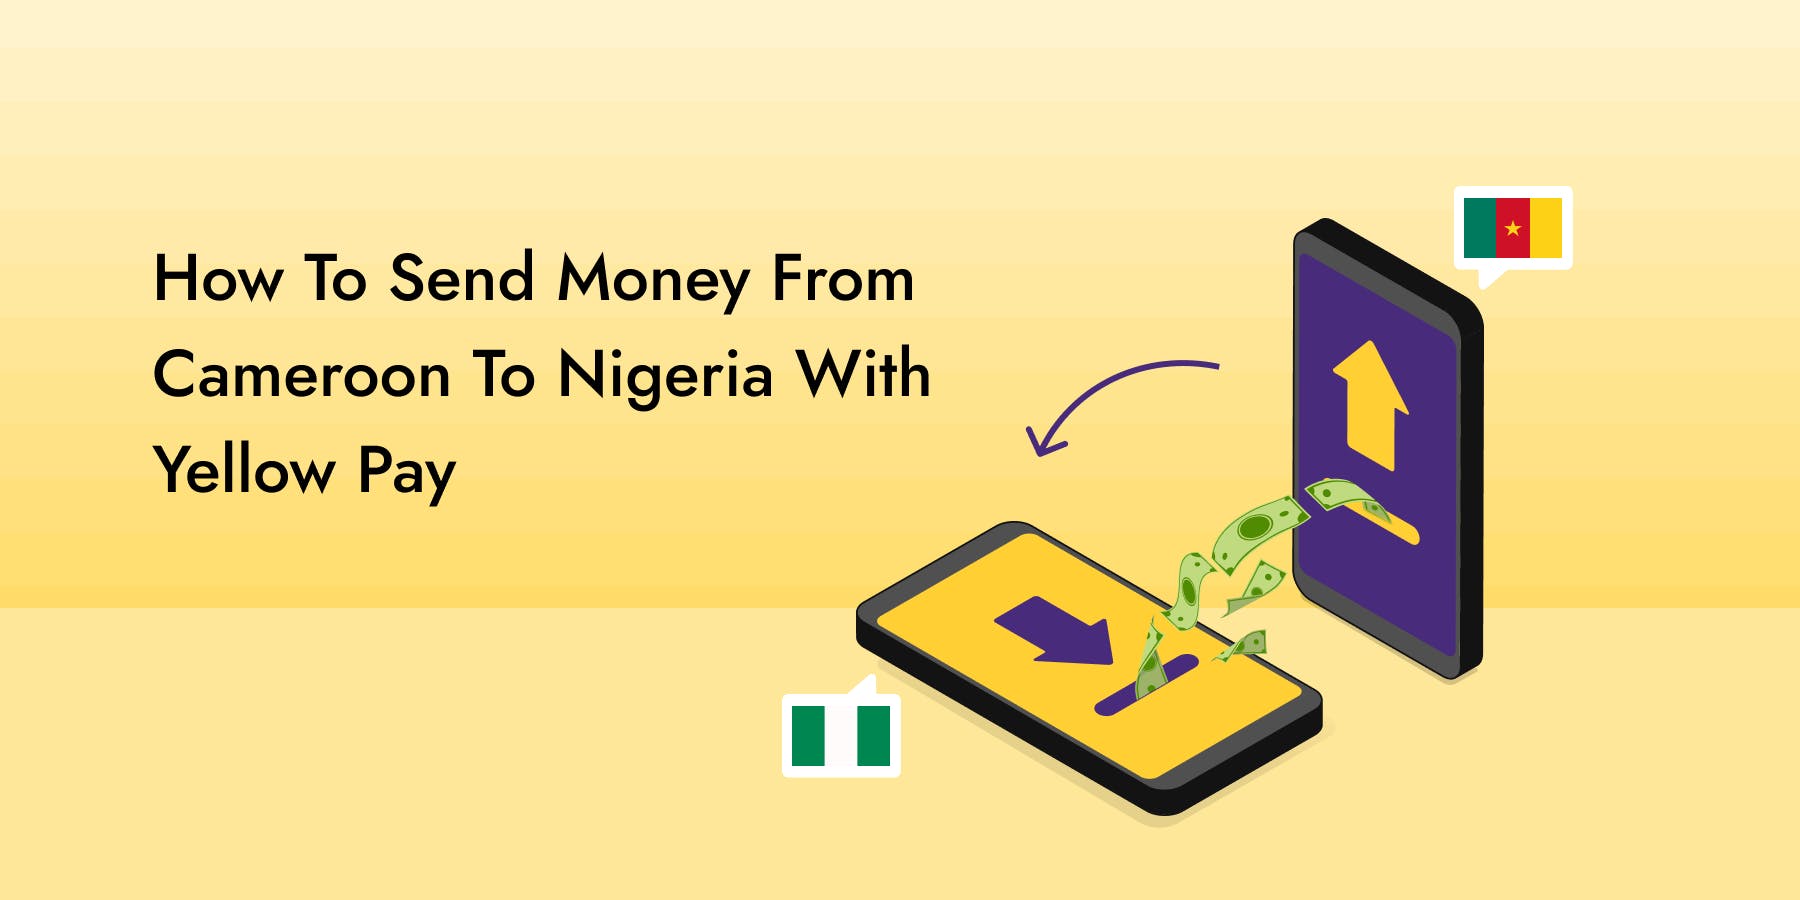 How To Send Money From Cameroon To Nigeria With Yellow Pay